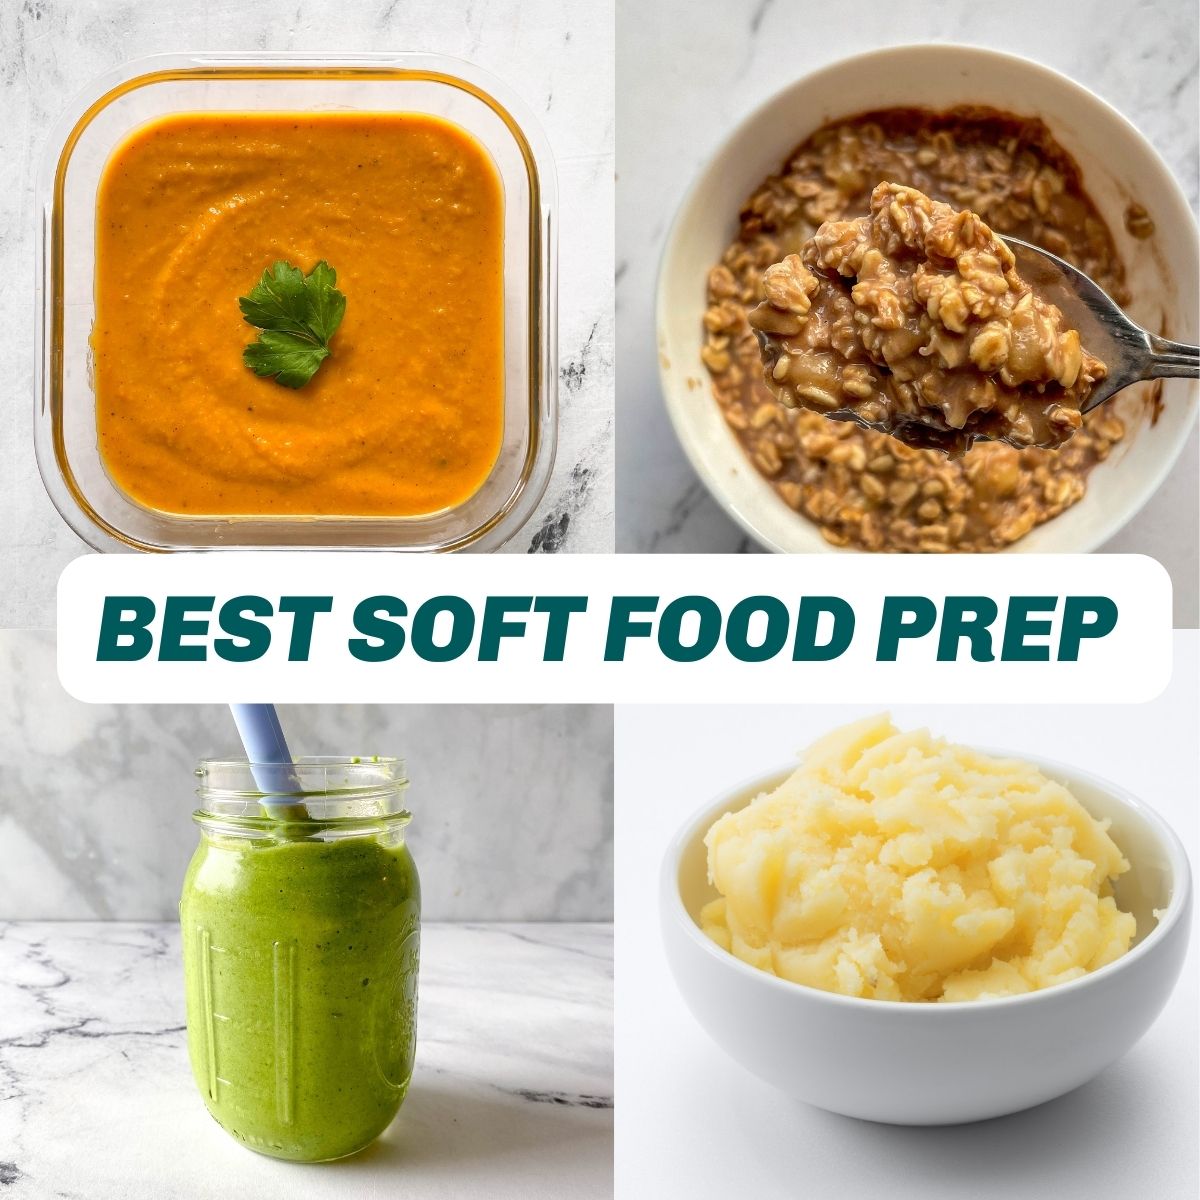 there are four different images of soft foods for after oral surgery. An orange soup on the top left, brown overnight oats on the top right, a green smoothie in a mason jar on the bottom left, and a bowl of yellow mashed potatoes on the bottom right.